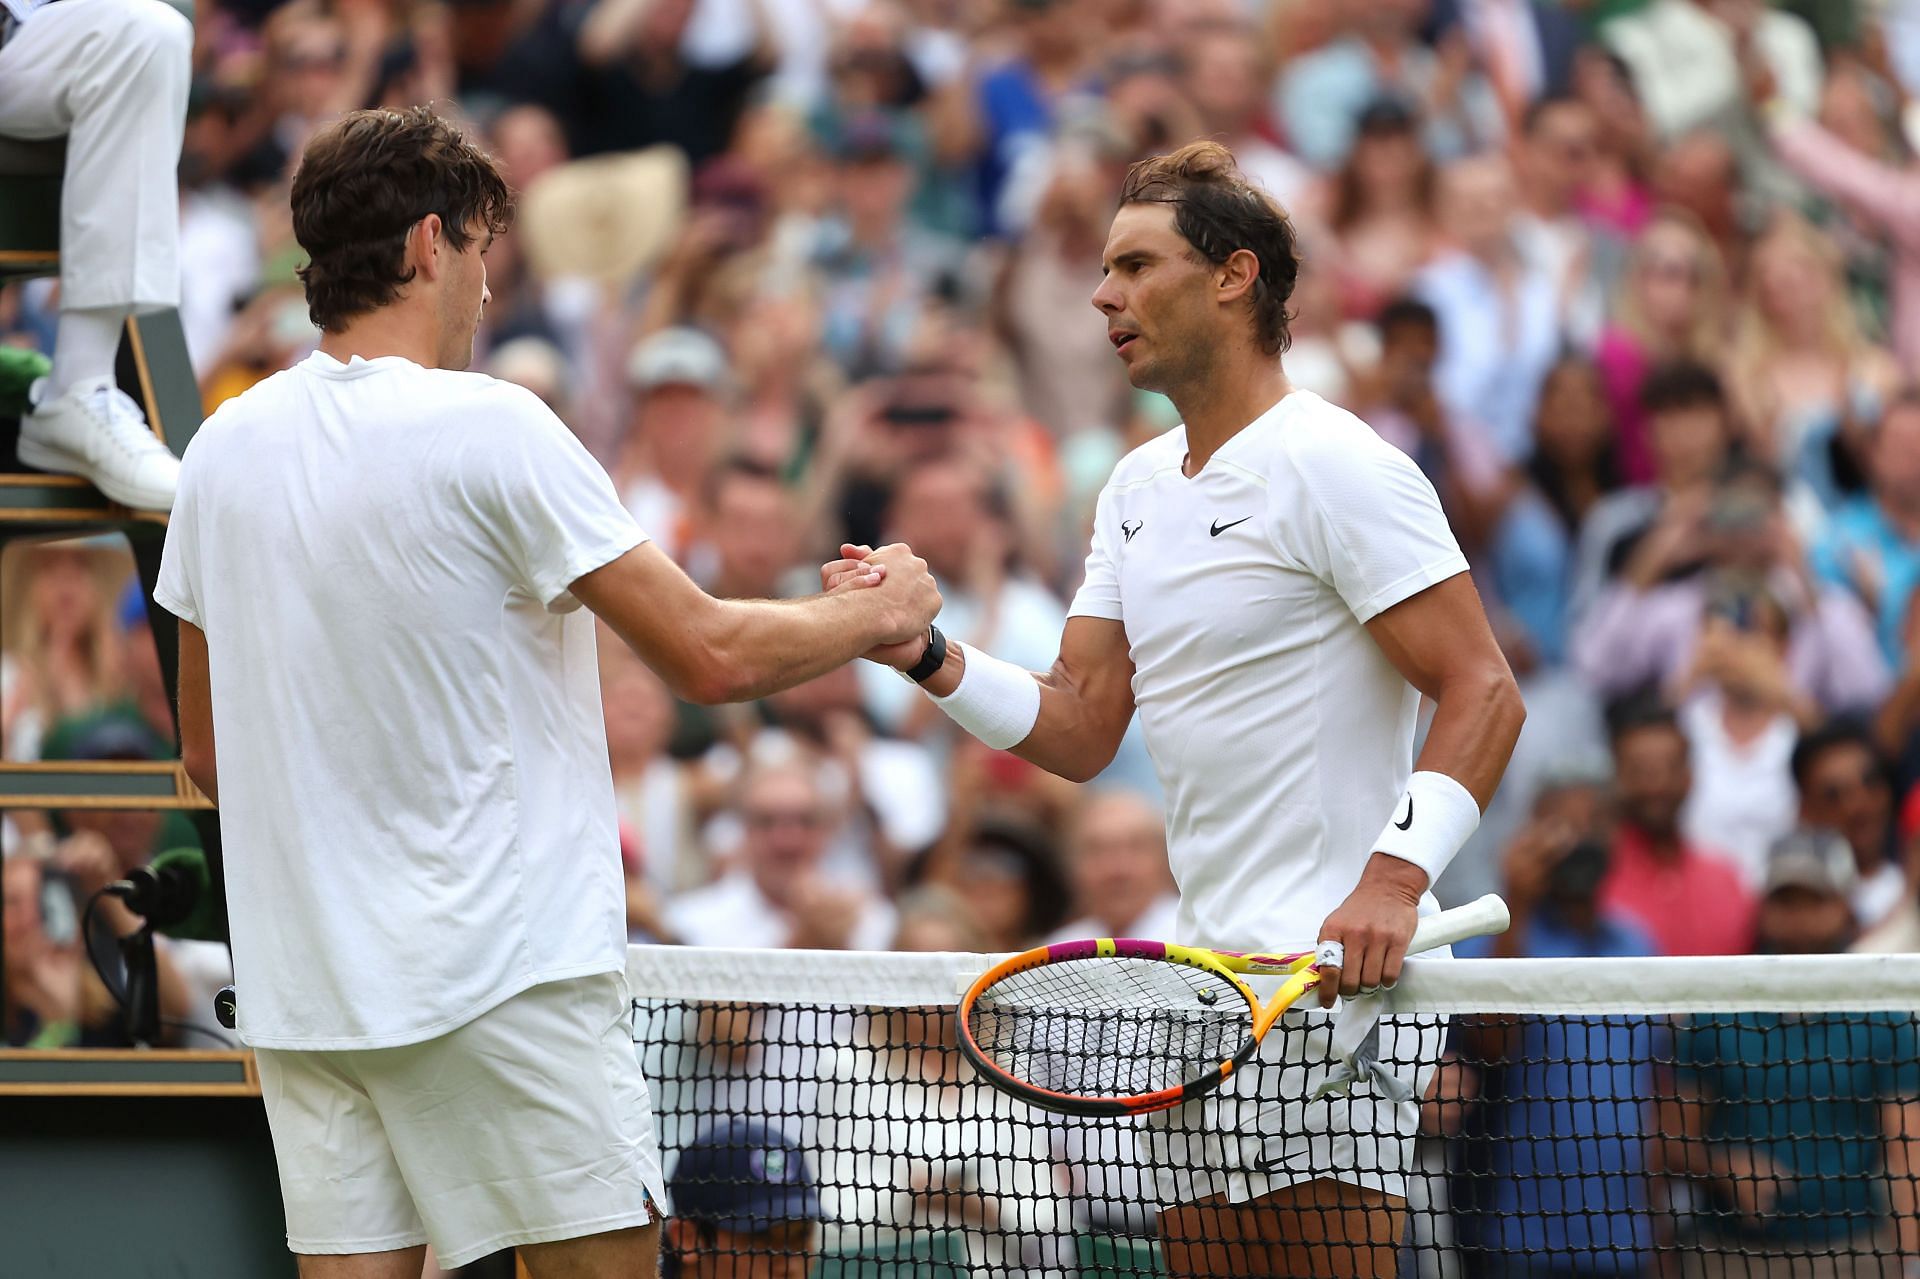 Rafael Nadal (right) shakes hands with Taylor Fritz (left) at the 2022 Wimbledon Championships.